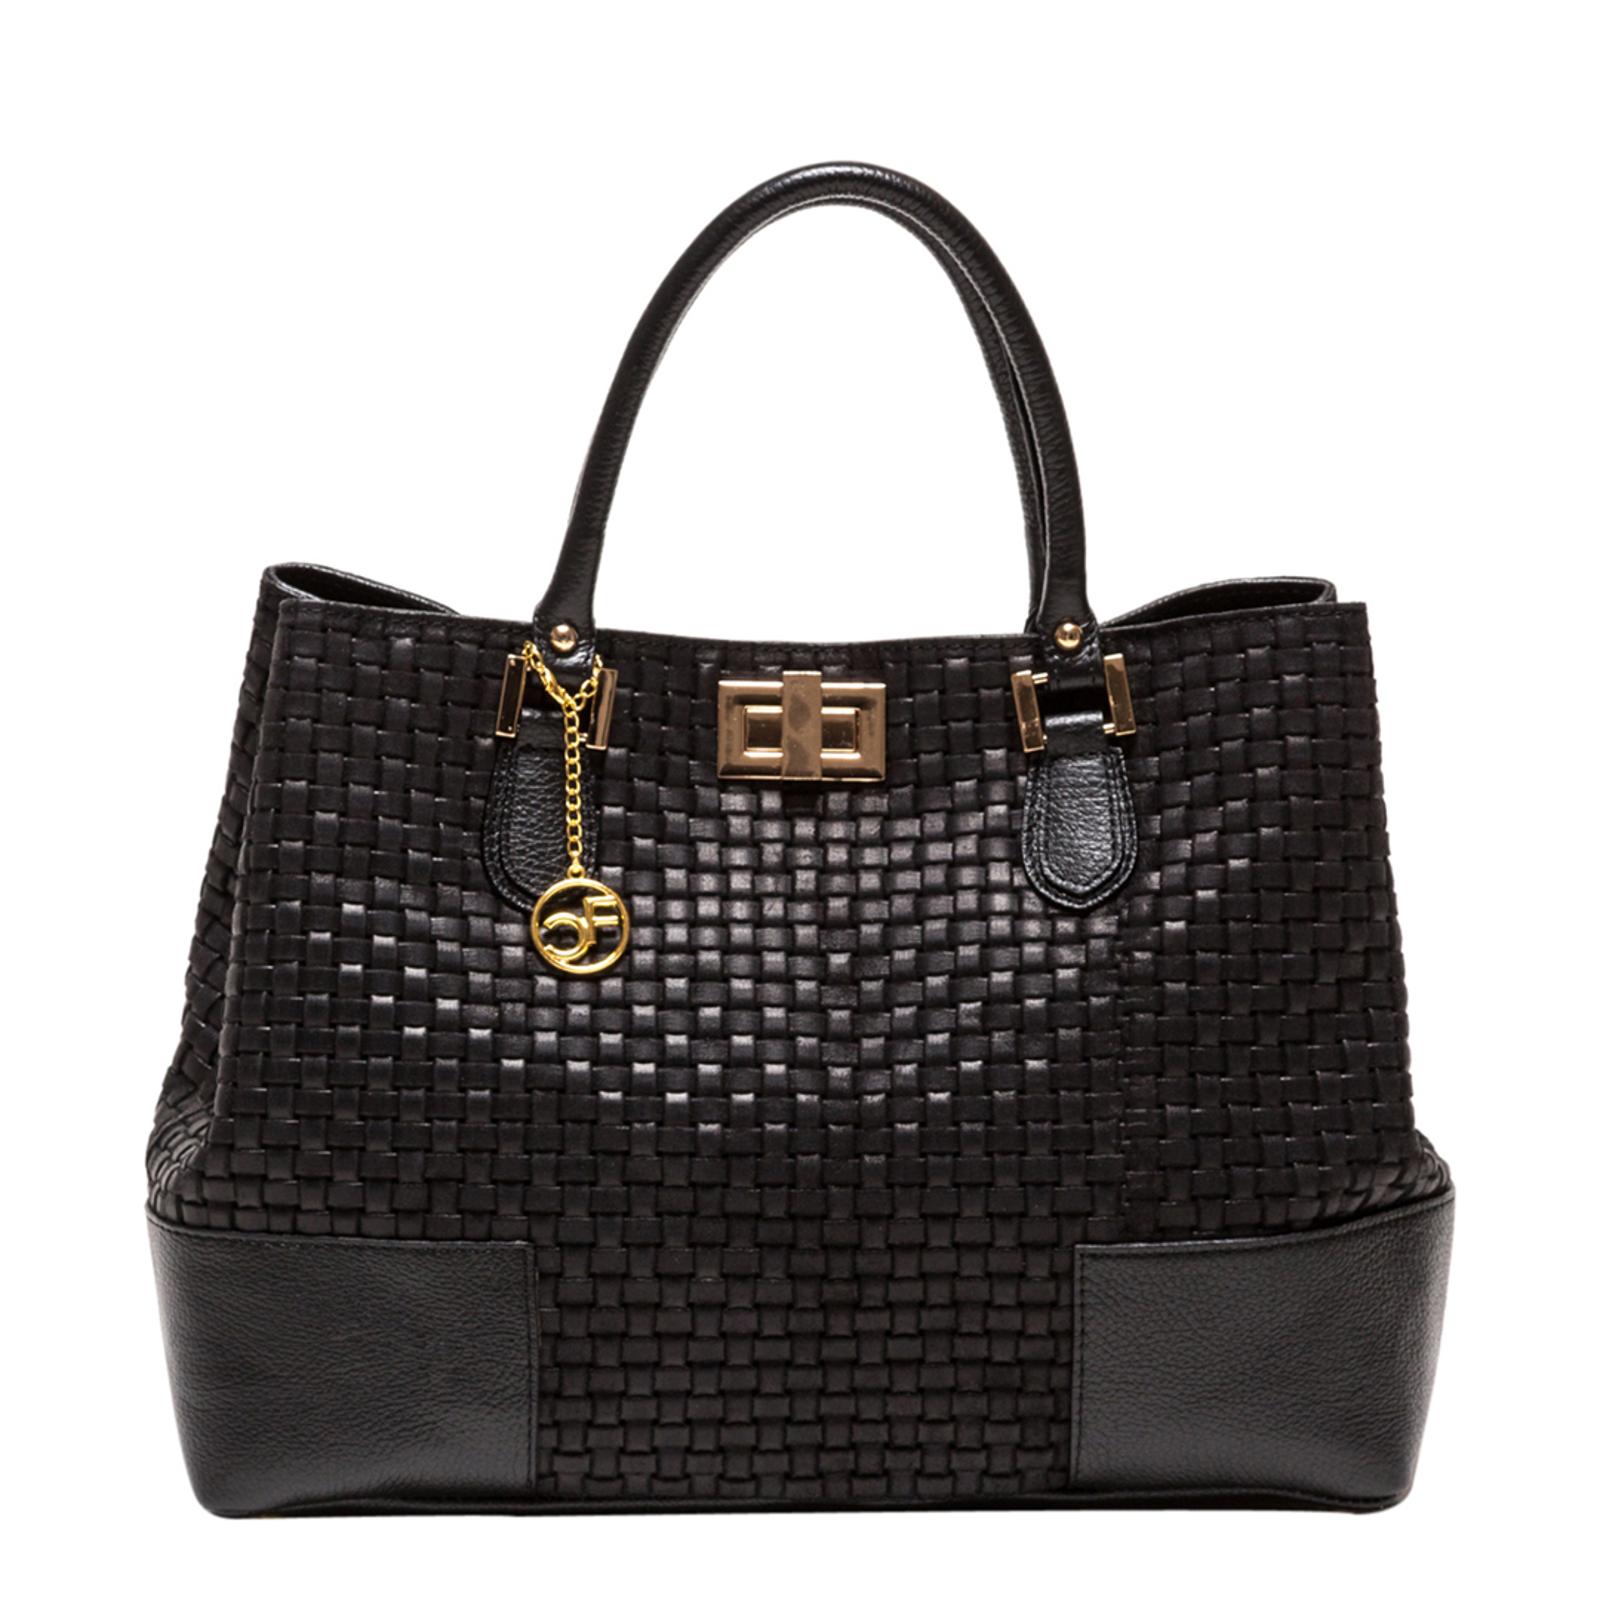 Black Leather Woven Tote Bag - BrandAlley